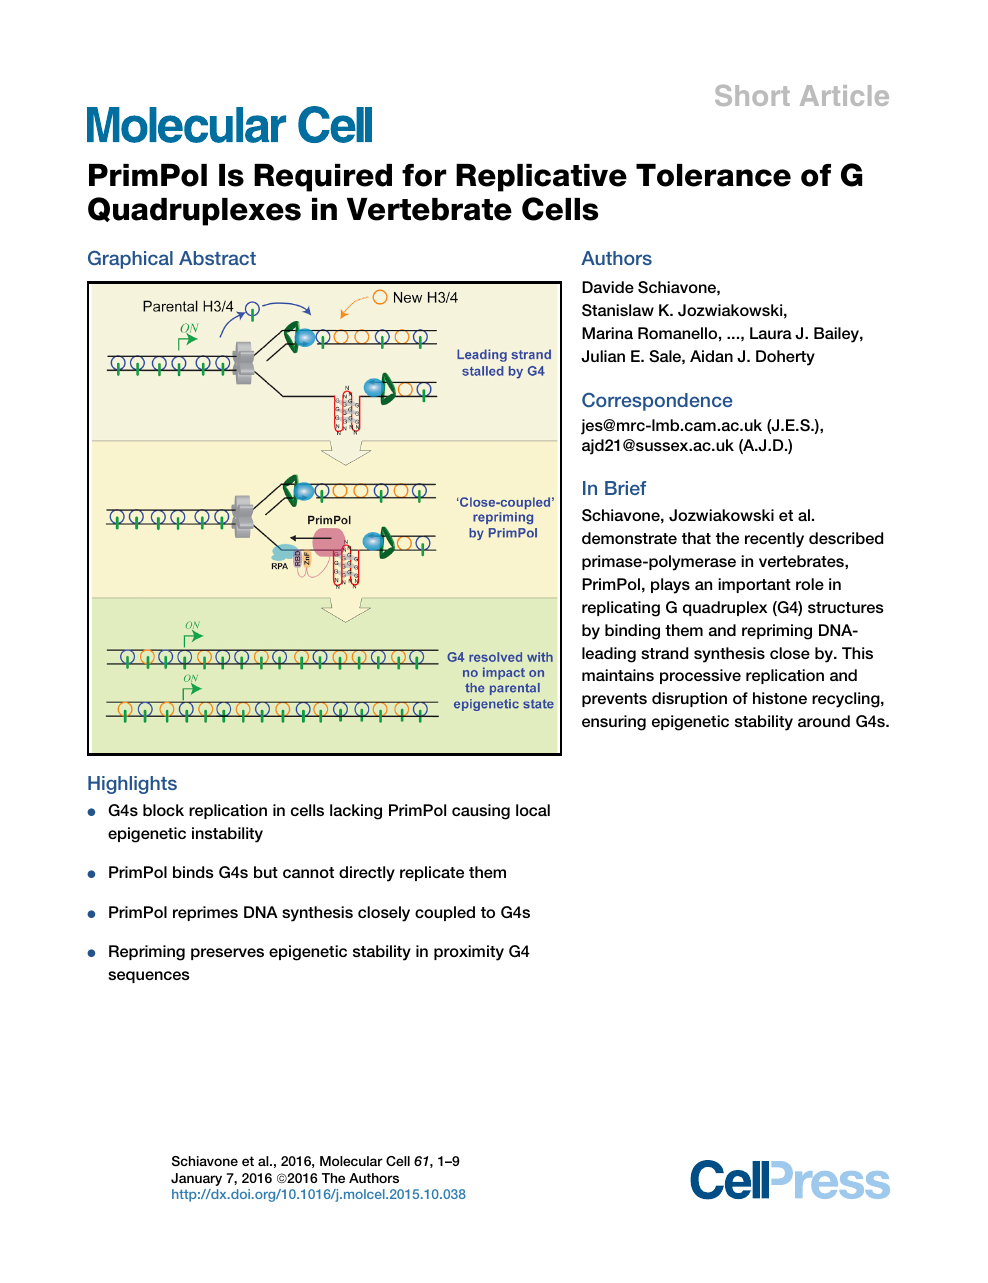 Primpol Is Required For Replicative Tolerance Of G Quadruplexes In Vertebrate Cells Topic Of Research Paper In Biological Sciences Download Scholarly Article Pdf And Read For Free On Cyberleninka Open Science